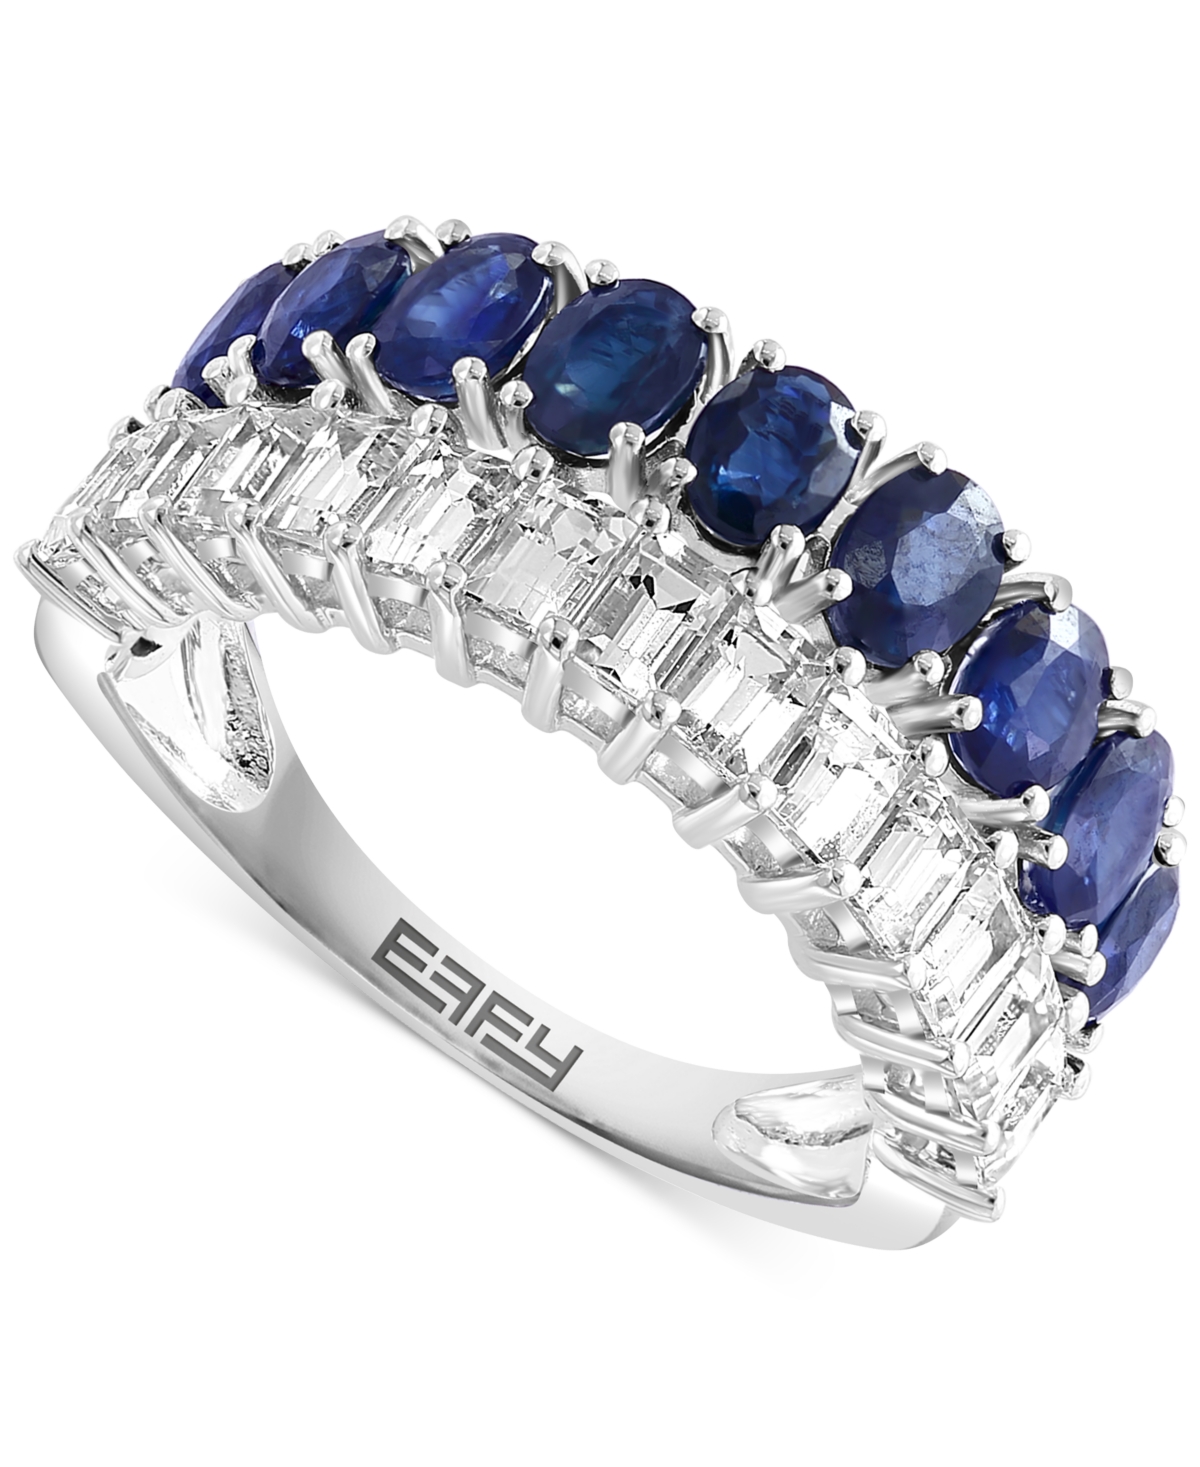 Effy Blue Sapphire (1-3/4 ct. t.w.) & White Sapphire (1 ct. t.w) Double Row Ring in 14k White Gold - White Gold